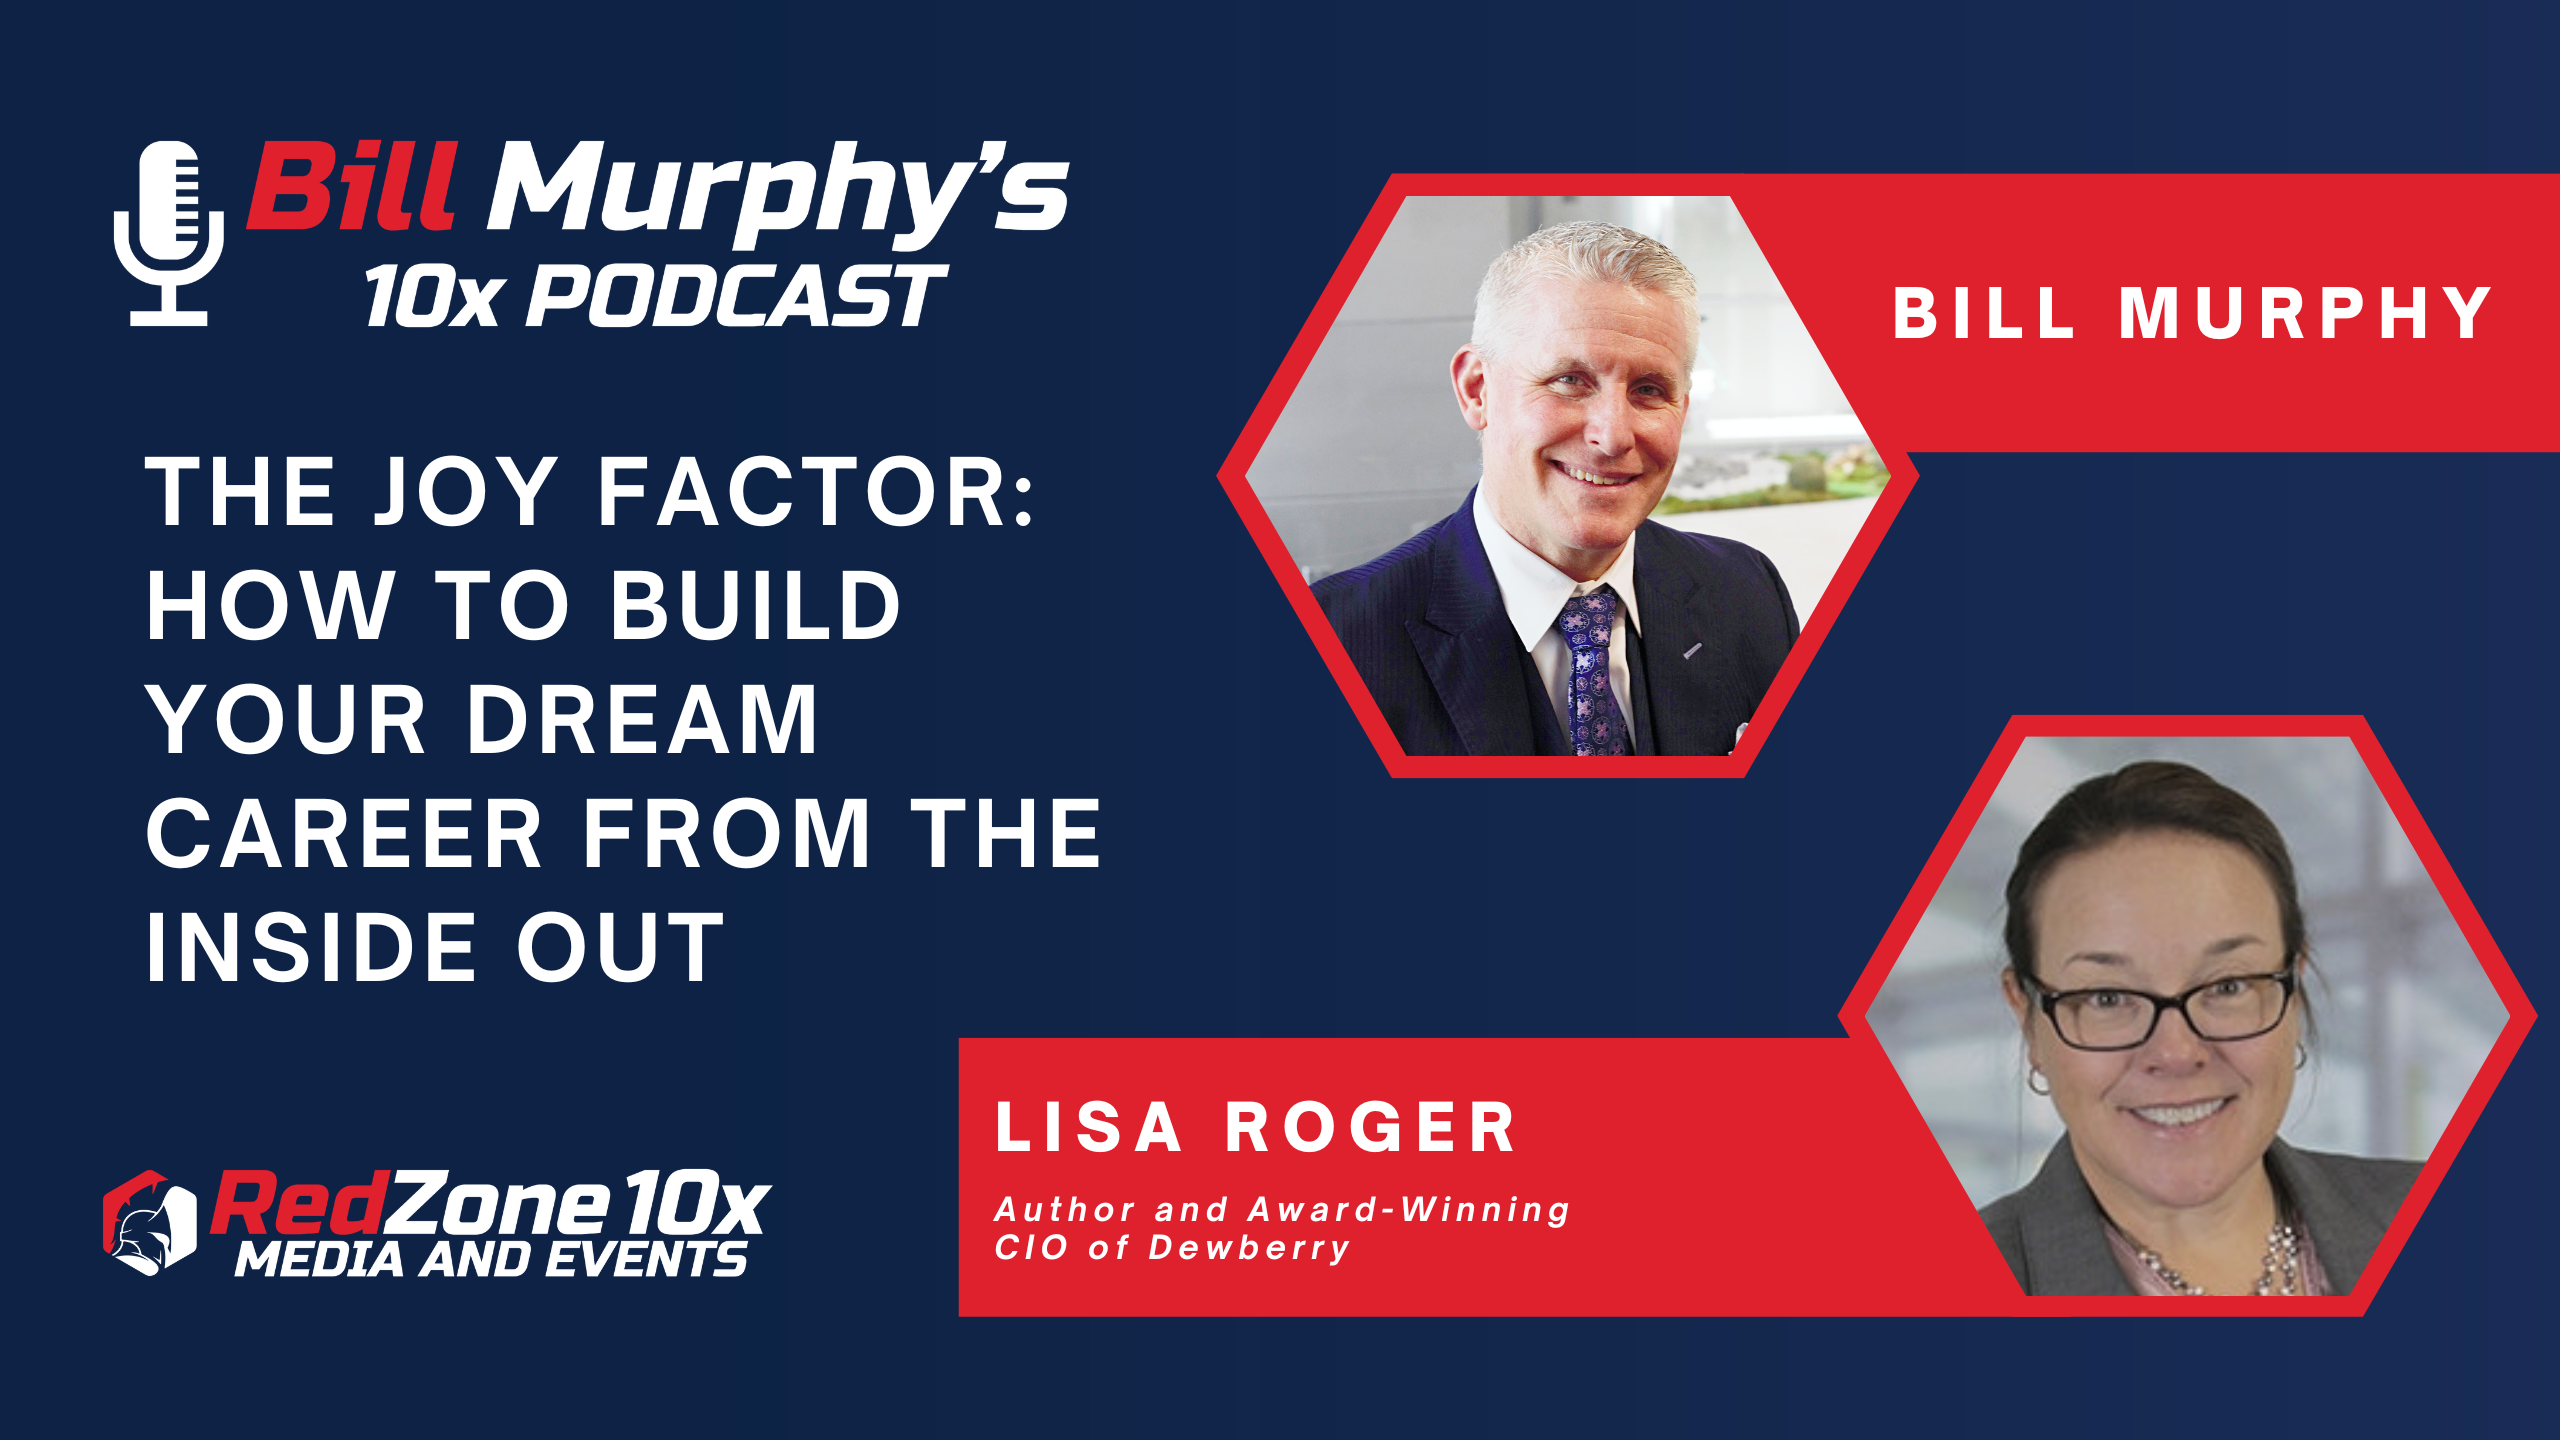 The Joy Factor: How to Build Your Dream Career from the Inside Out, with Lisa Roger, Author and Award-Winning CIO of Dewberry